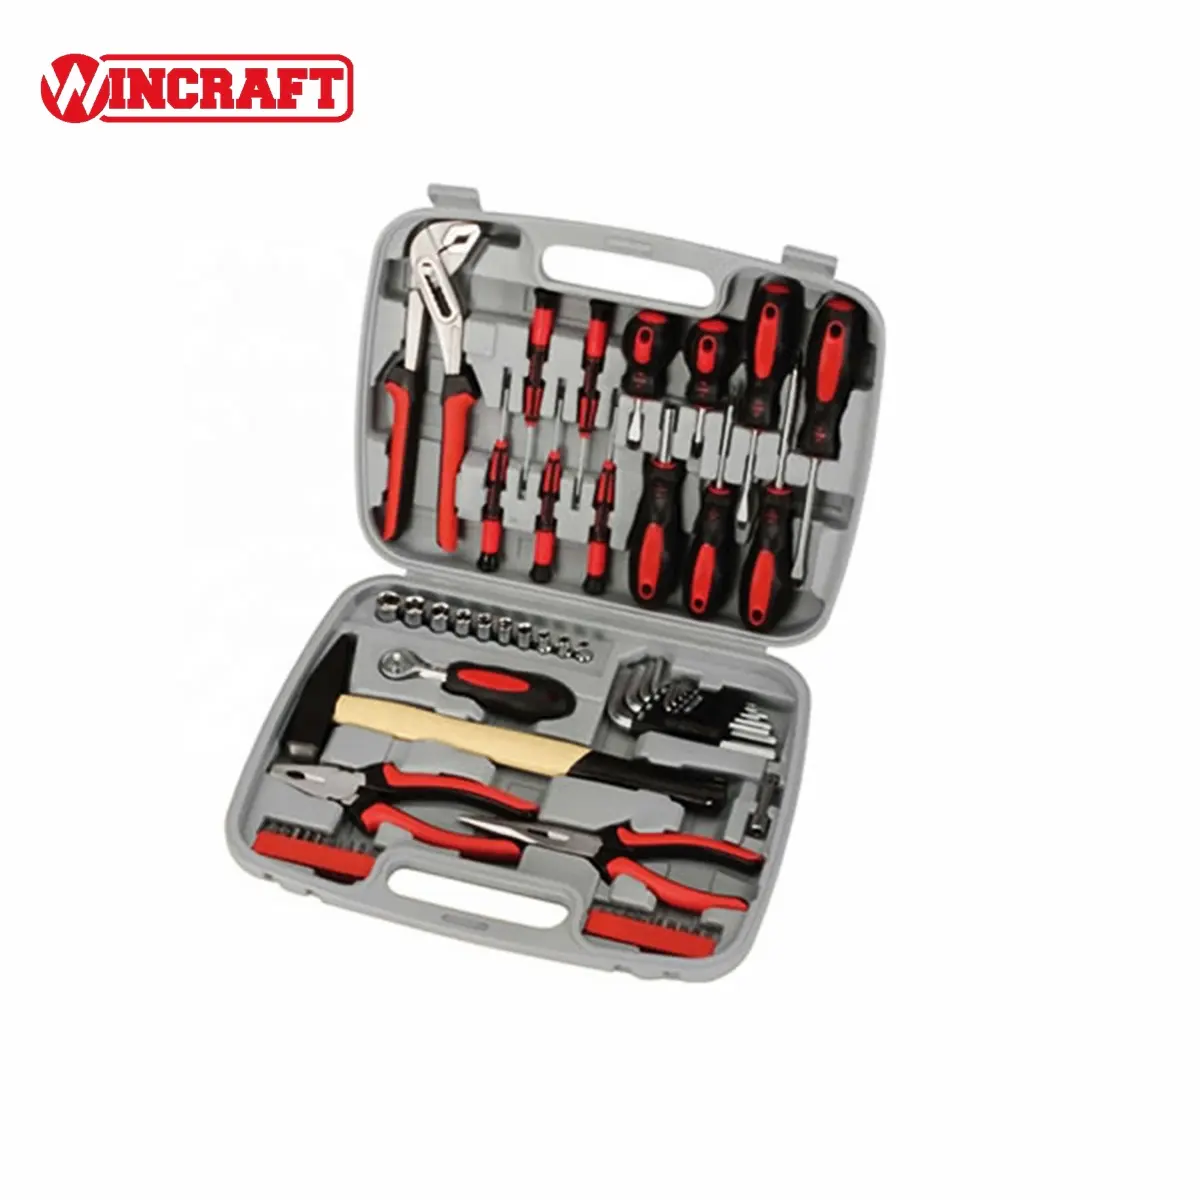 57pcs Combination Tool Set Household Repairing Tool Kit with 10" Water Pump Plier 300g Machinist Hammer